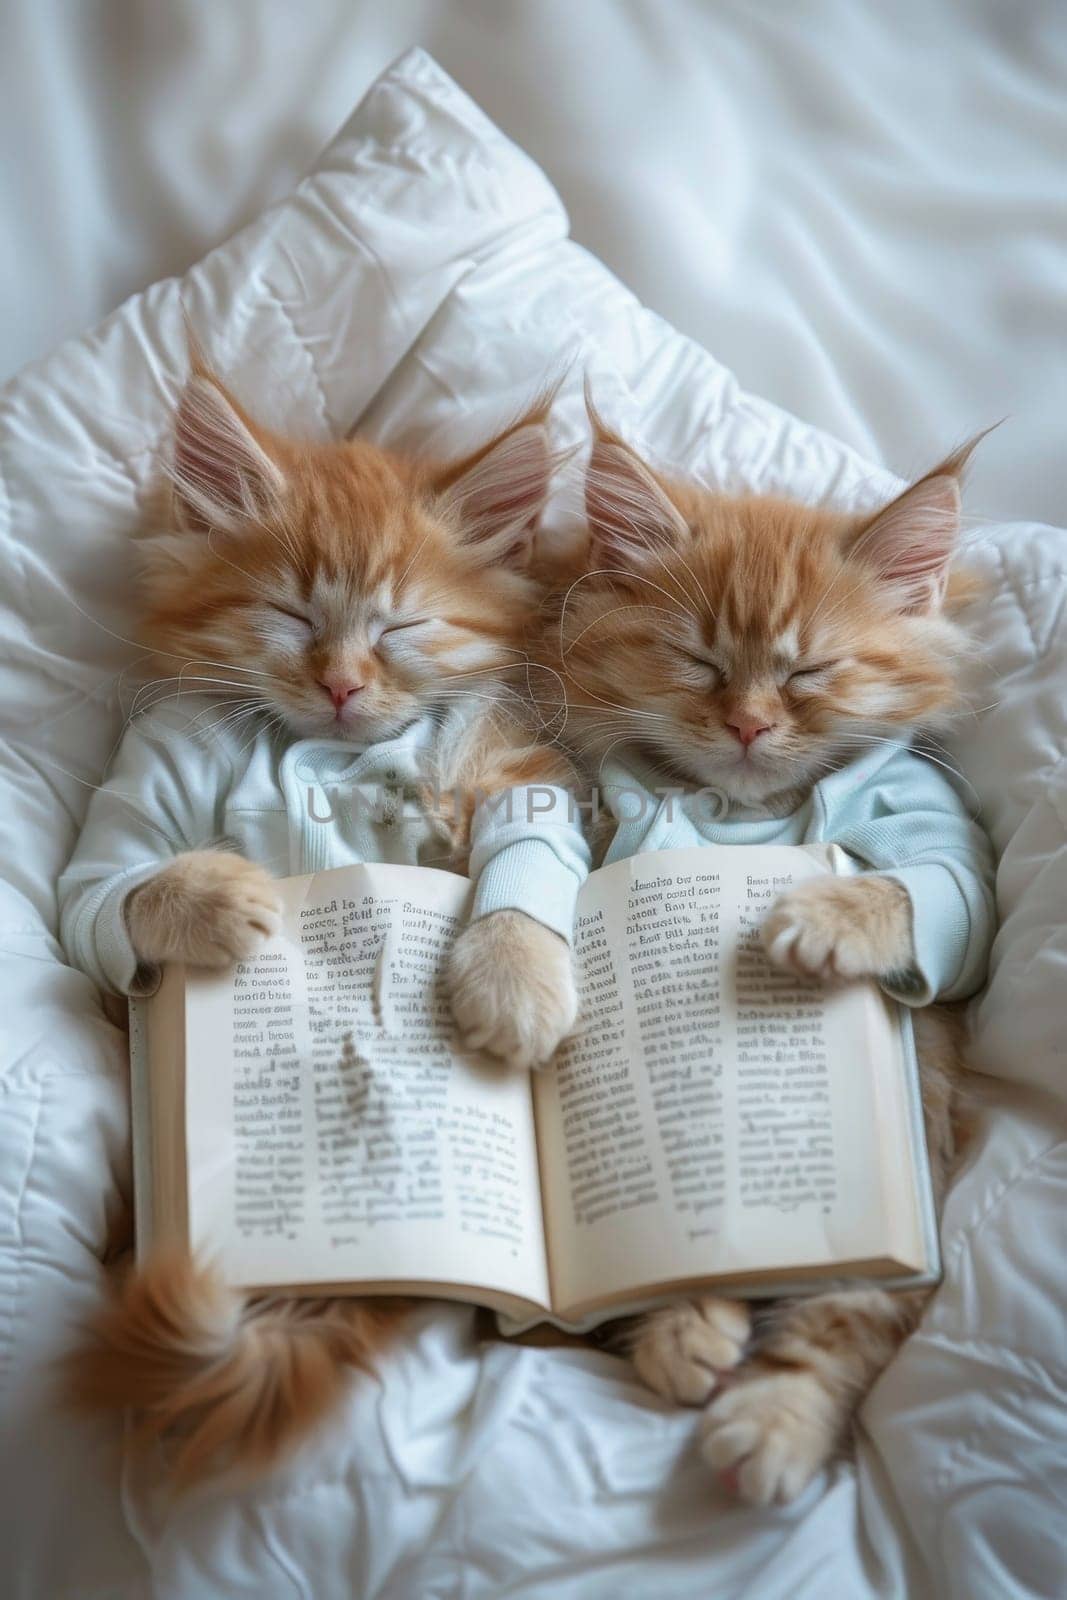 Two orange kittens are sleeping on a bed with a blue blanket by itchaznong